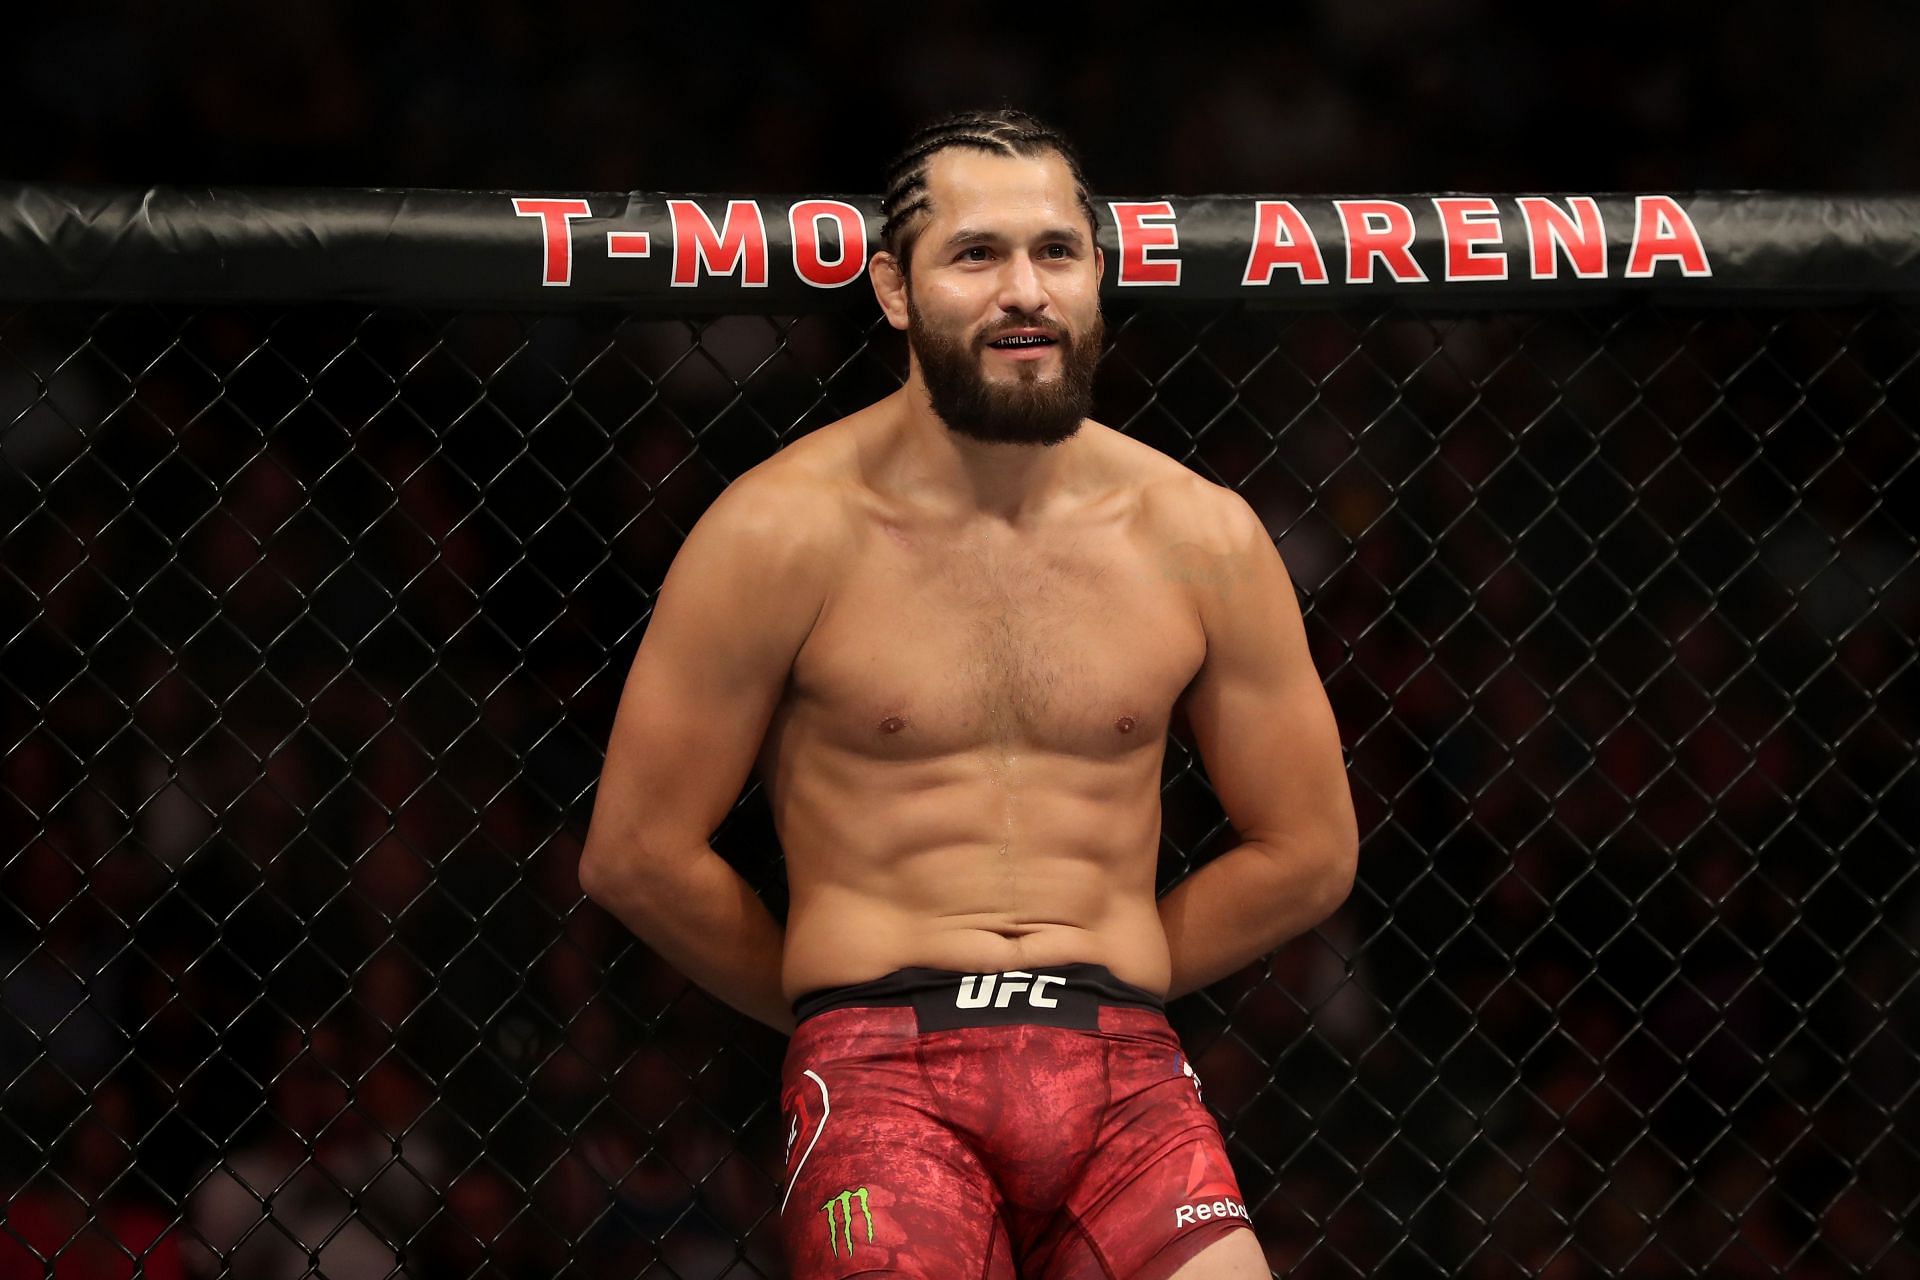 Masvidal is no longer competing at UFC 269 due to an injury